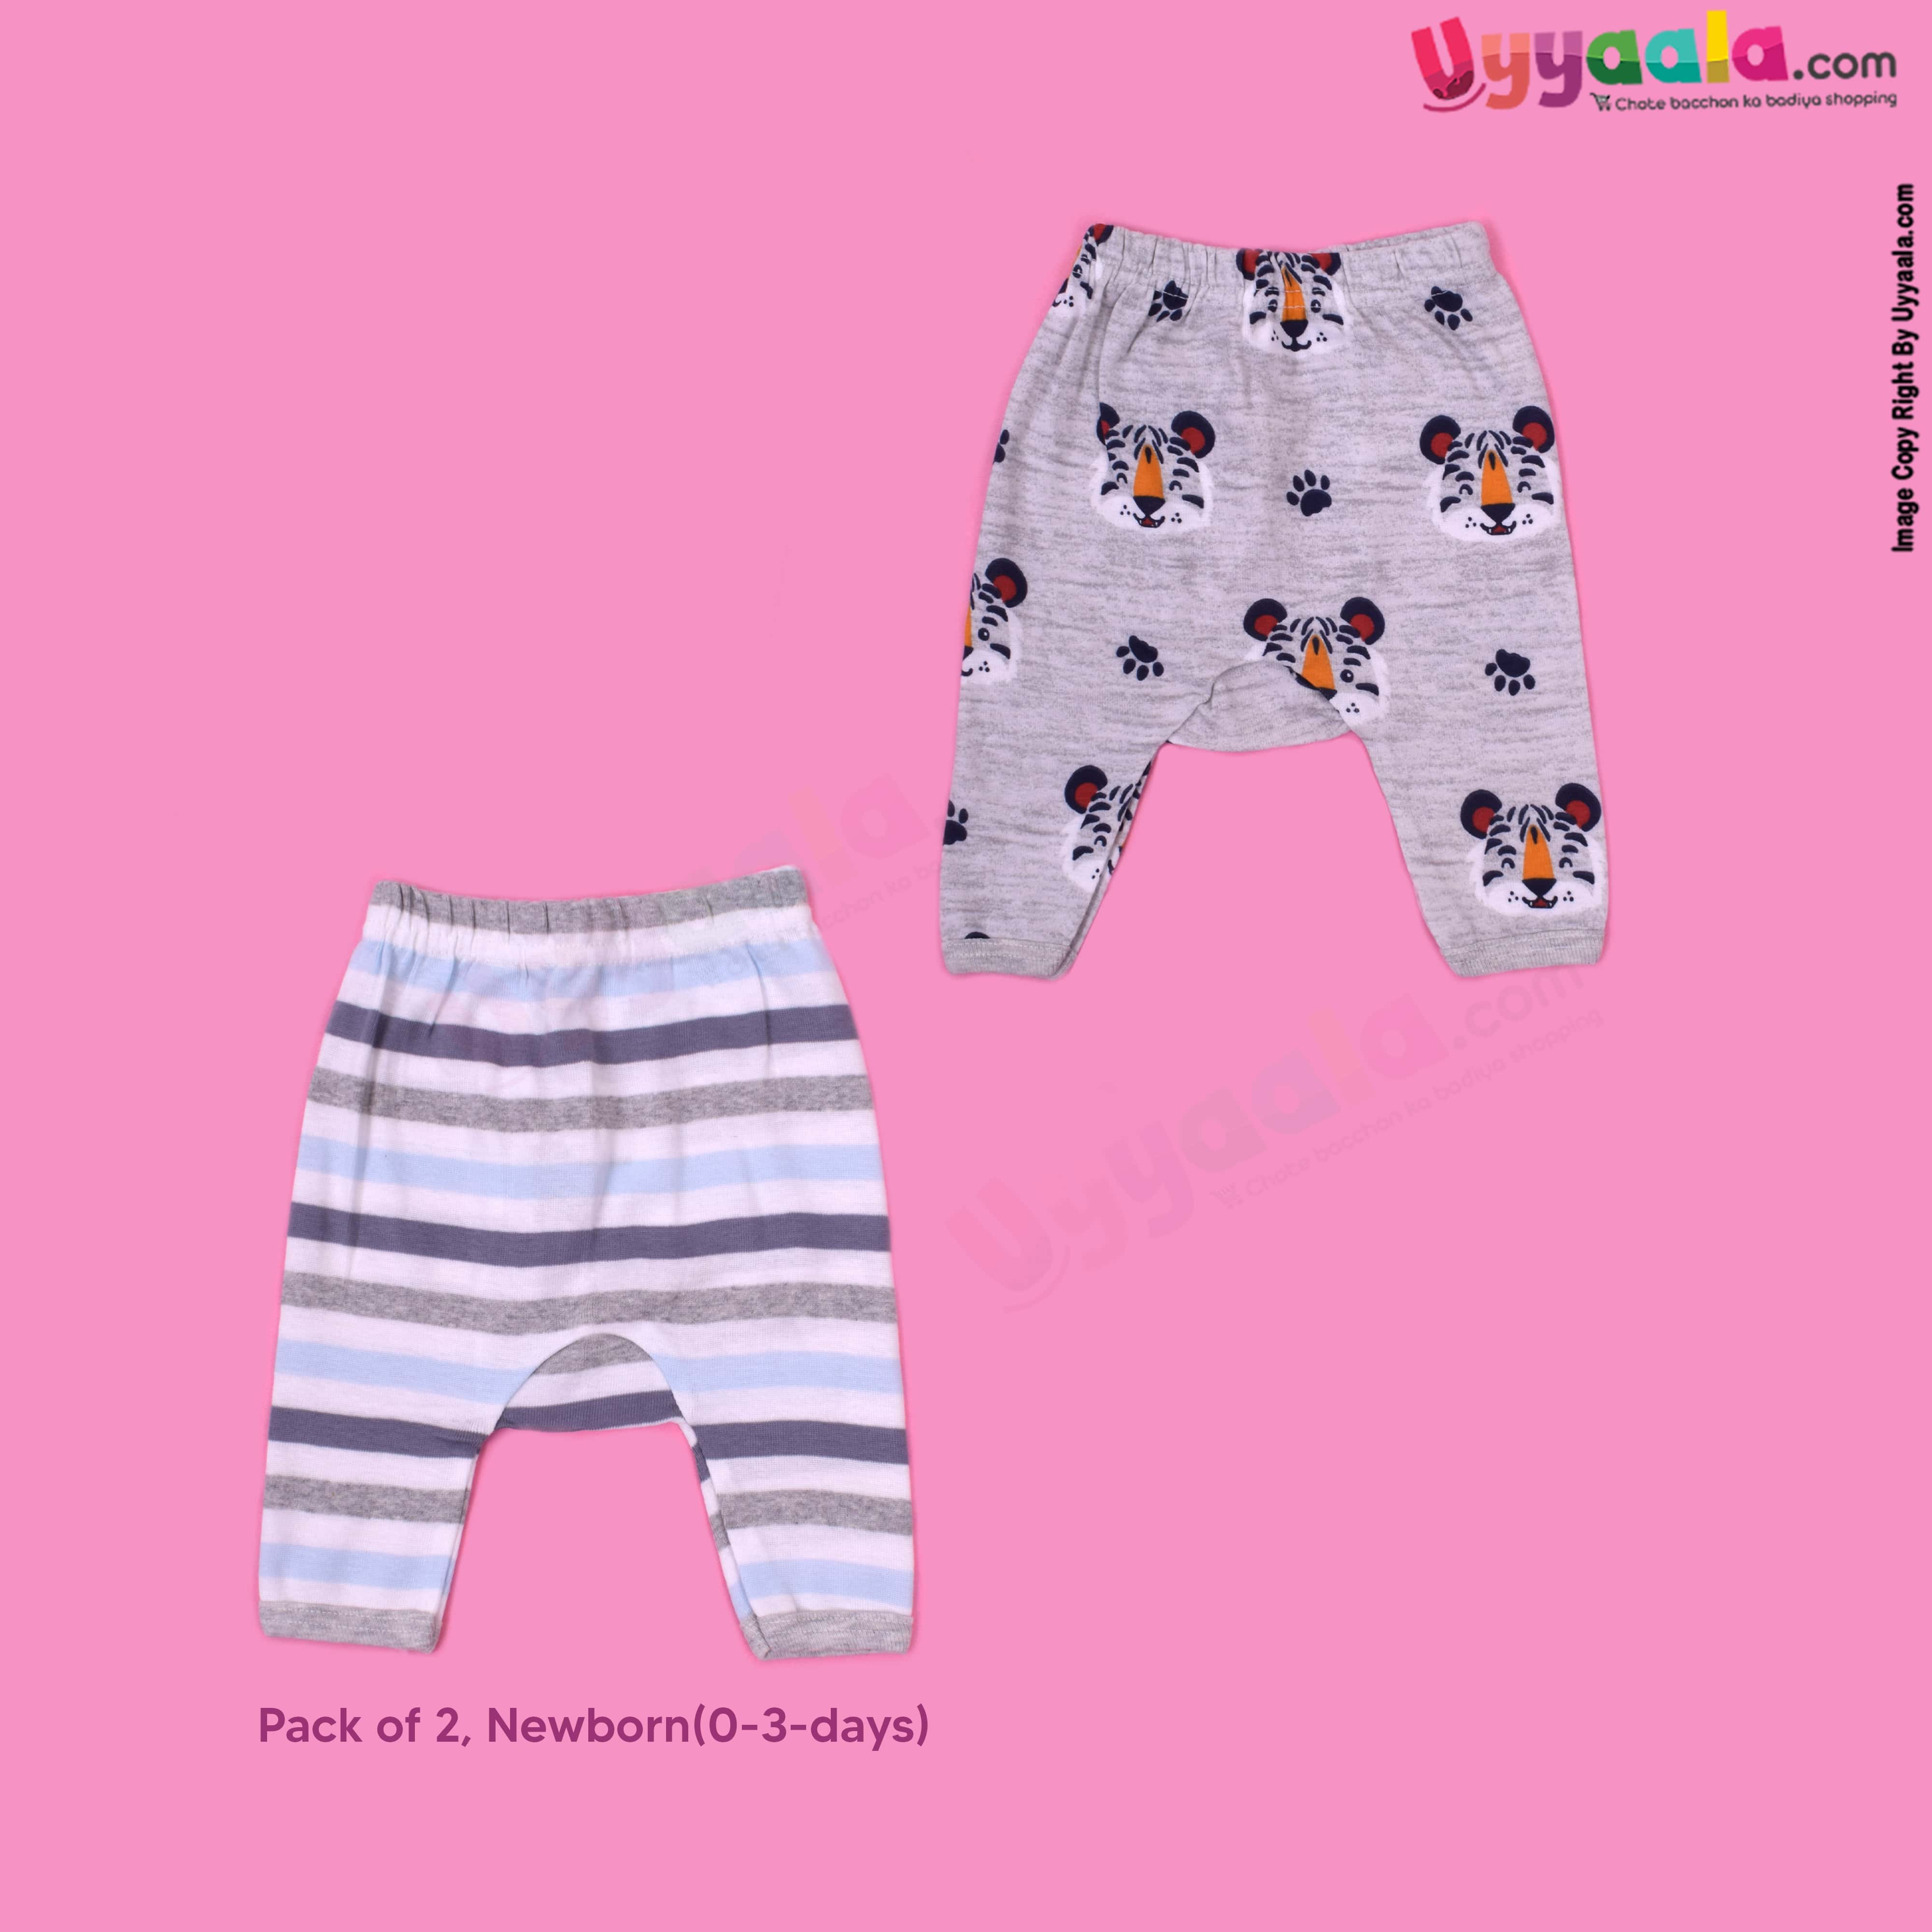 PRECIOUS ONE diaper pants 100% soft hosiery cotton pack of 2 - gray with tiger print & multicolour stripes (newborn)